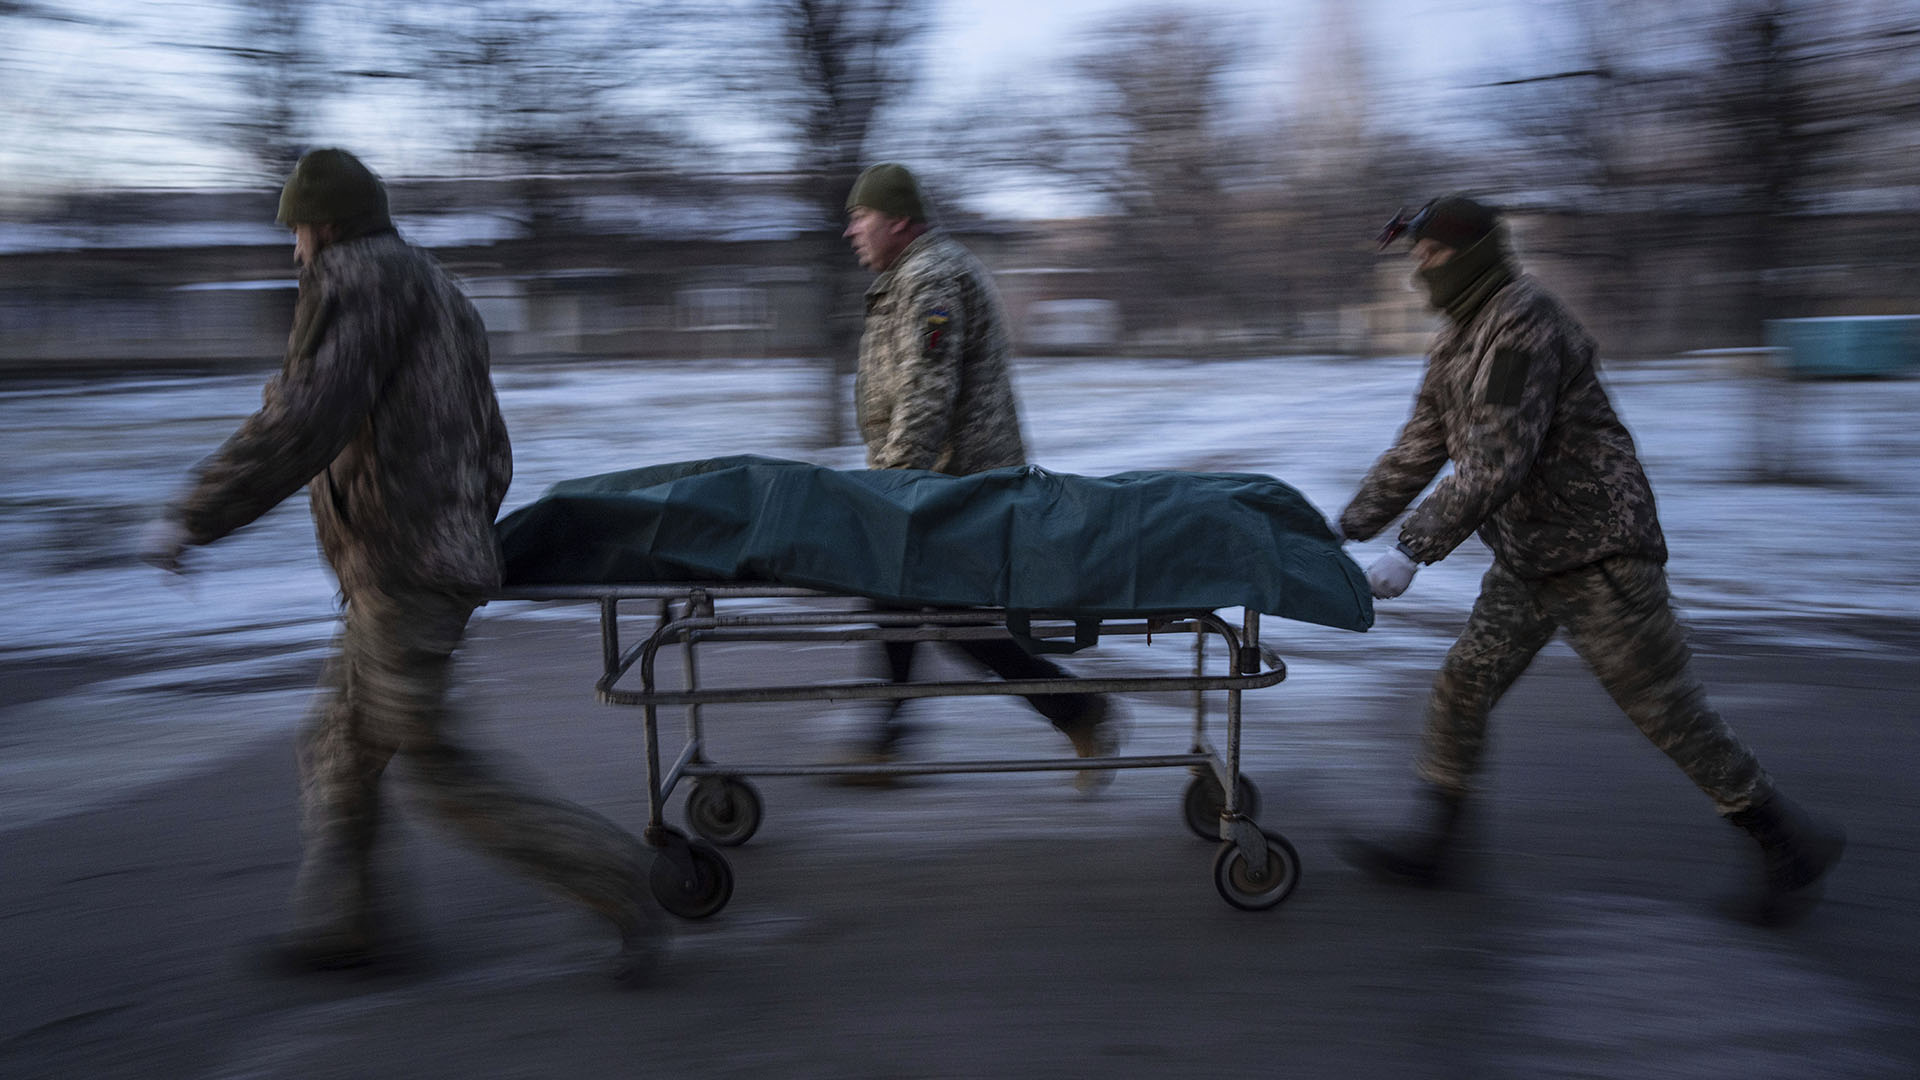 Ukrainian military medics carry a stretcher with the body of their slain comrade to a morgue in the Donetsk region, Ukraine, Monday, Jan. 9, 2023. (AP Photo/Evgeniy Maloletka)